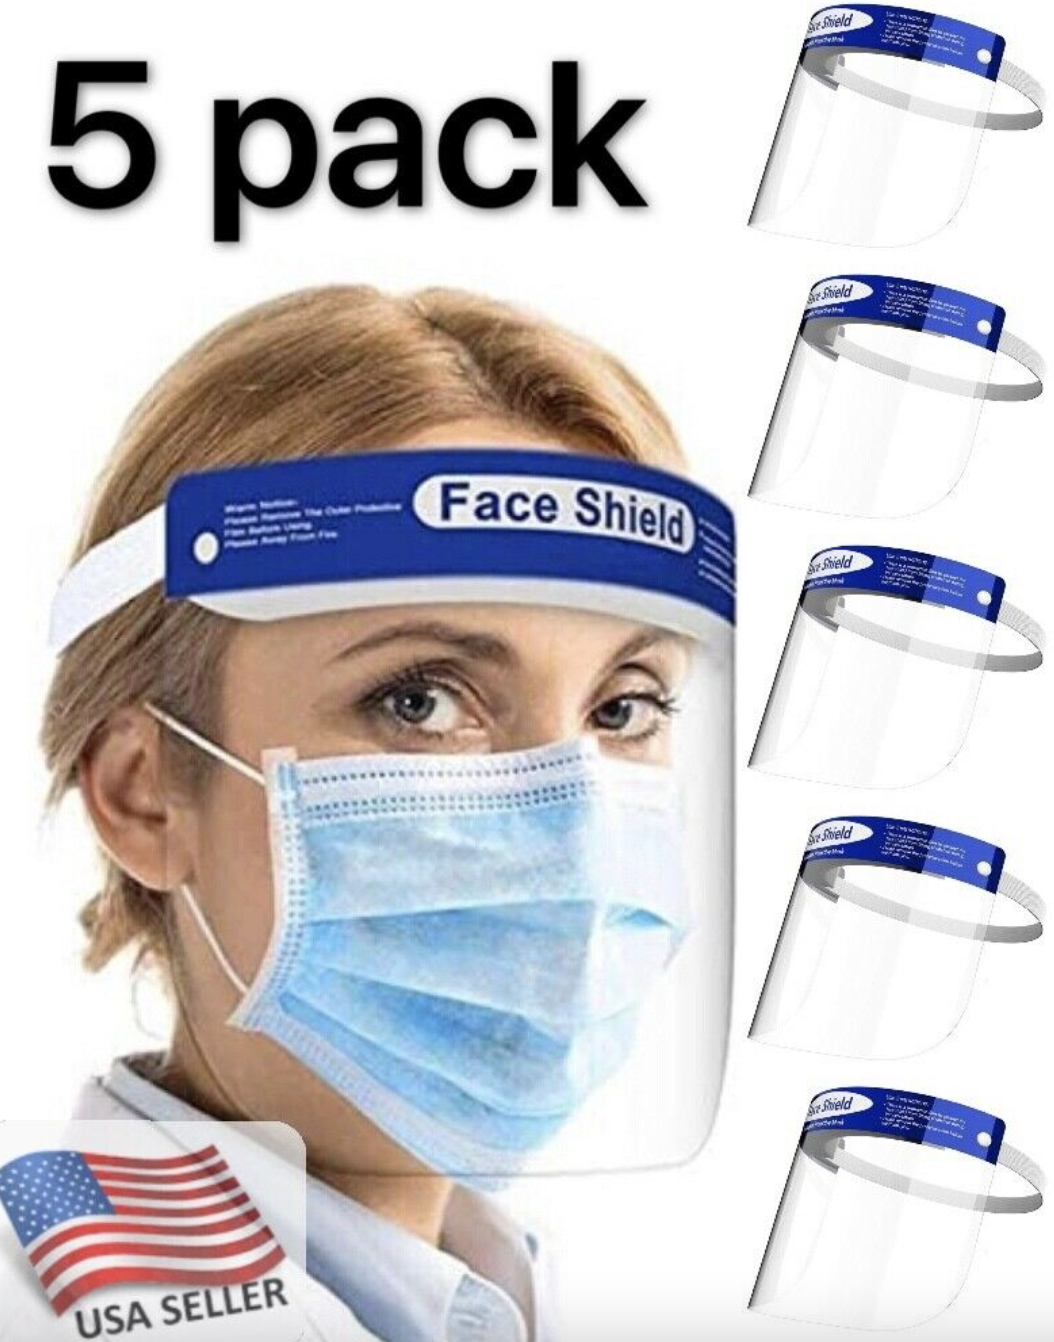 New! 5x Pcs Pack Face Shield Medical Eye Safety Ppe Clear Visor | Free 🚚fast!